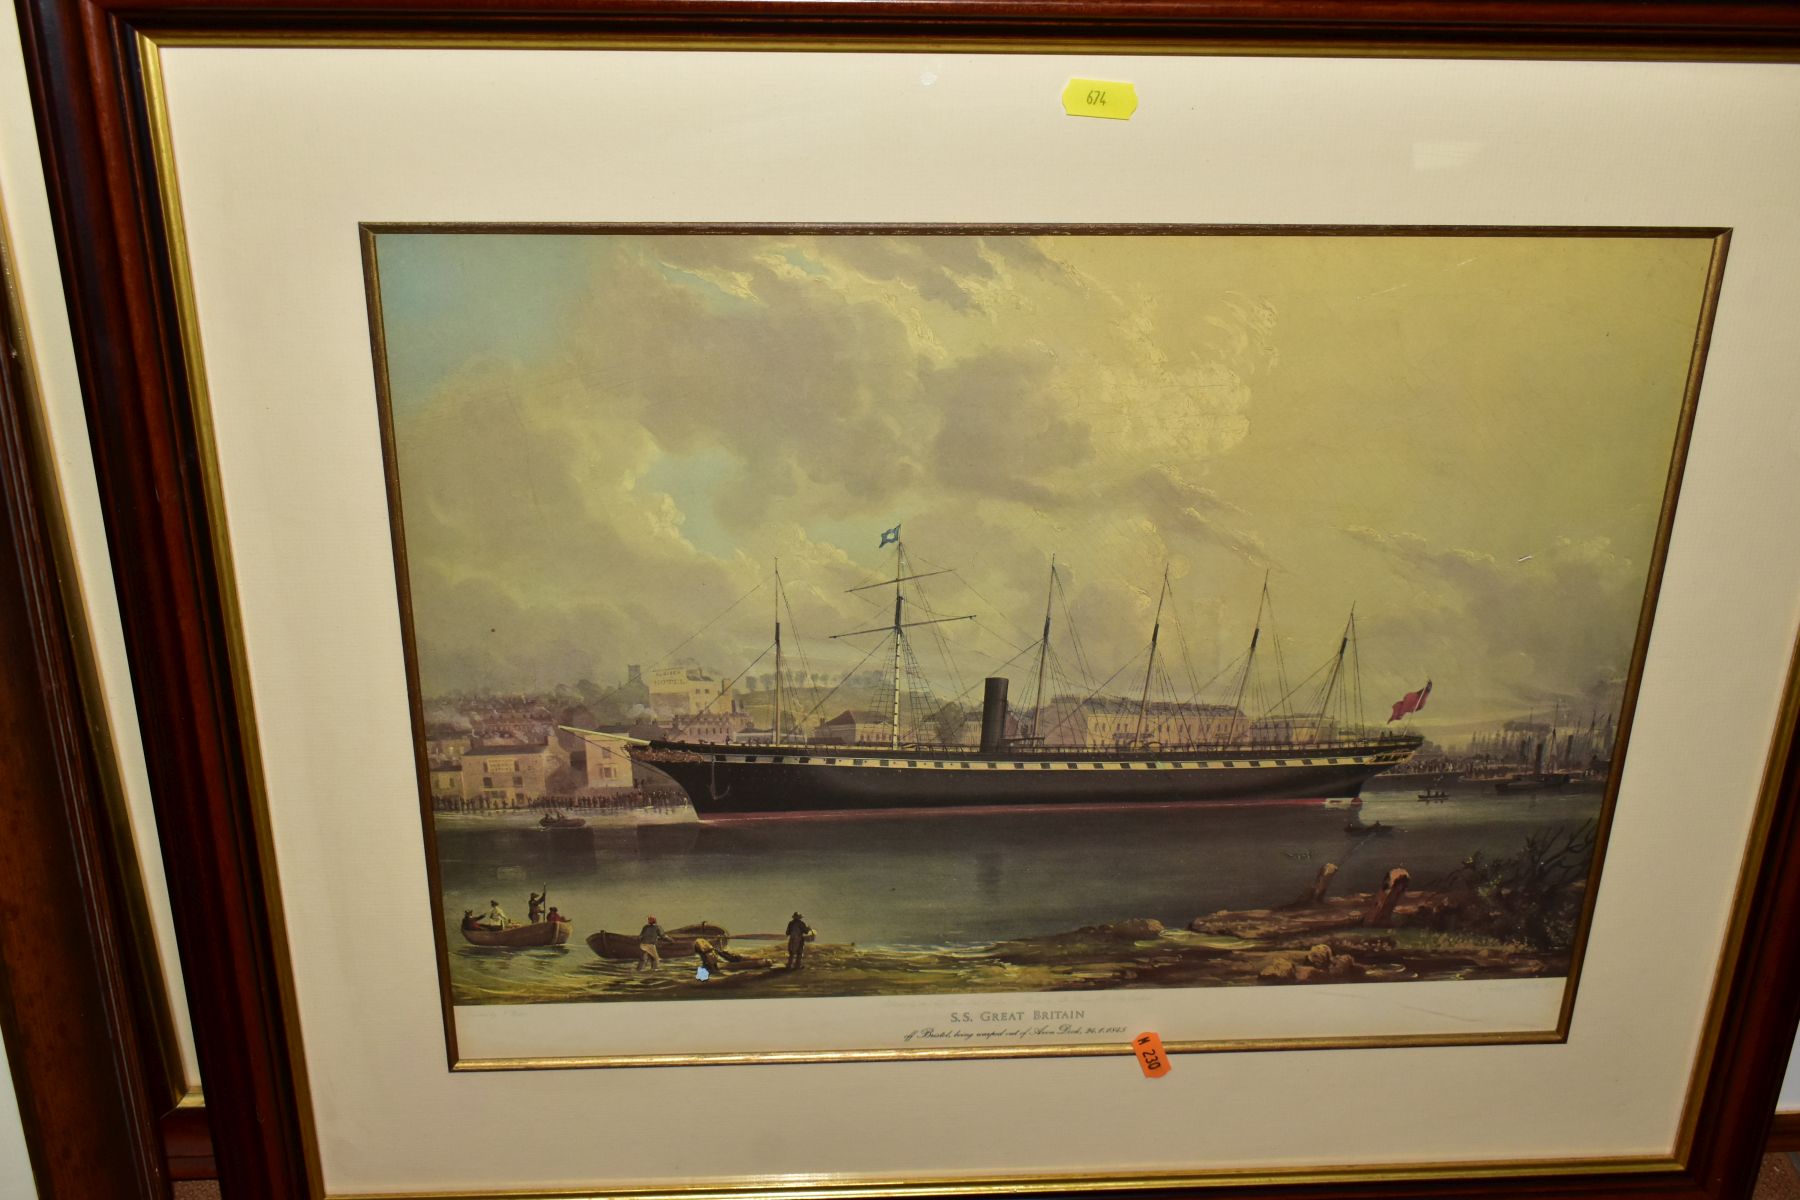 PICTURES AND PRINTS ETC, to include maritime prints - signed Steven Dews 'The Tweed in the Channel - Image 9 of 10